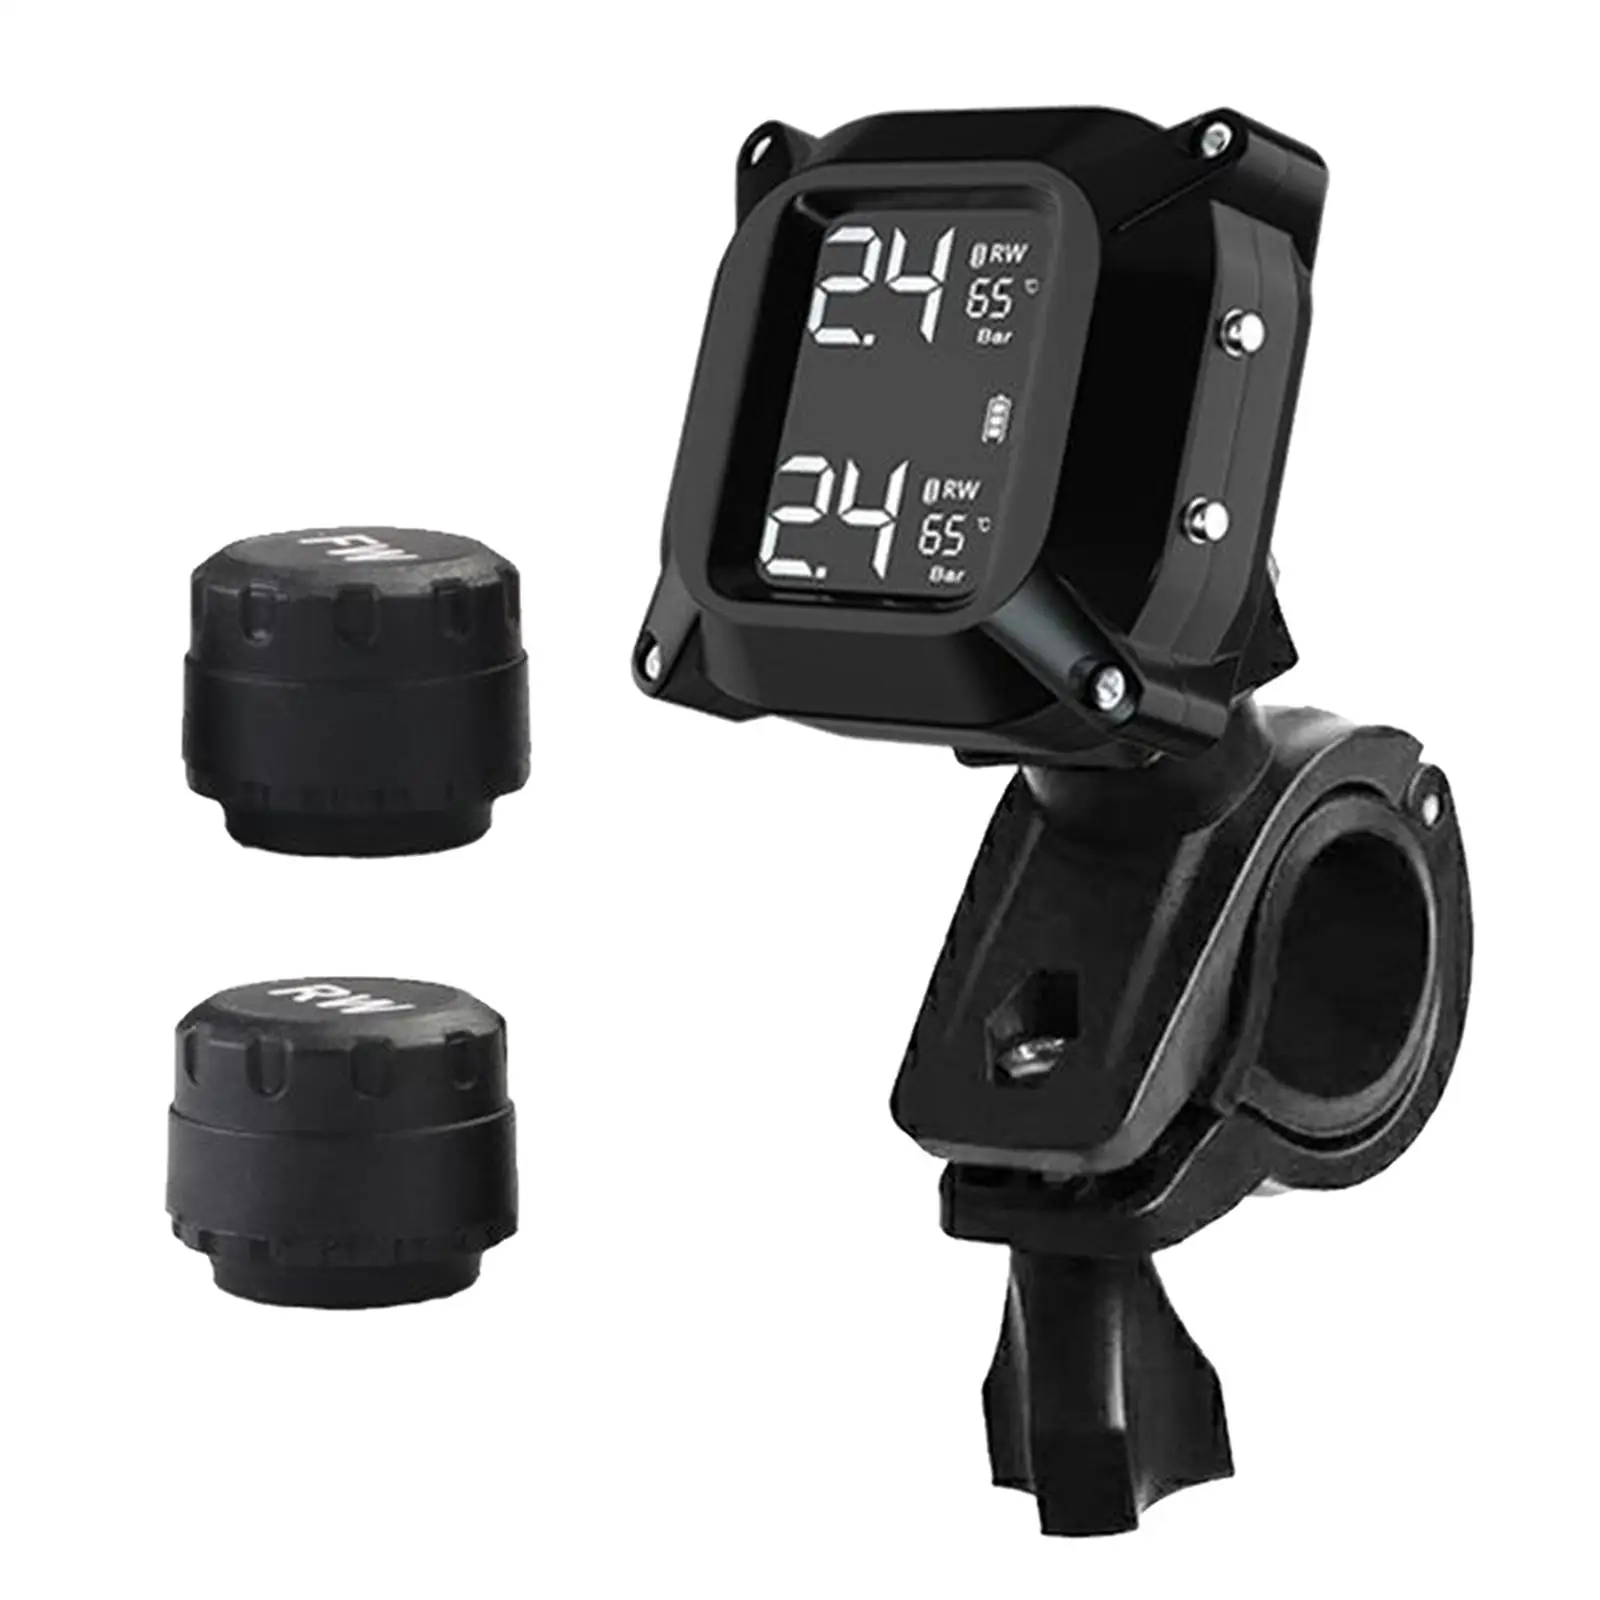 Tire Pressure Monitoring System with 2 TH/WI Sensor for Motorcycle Car